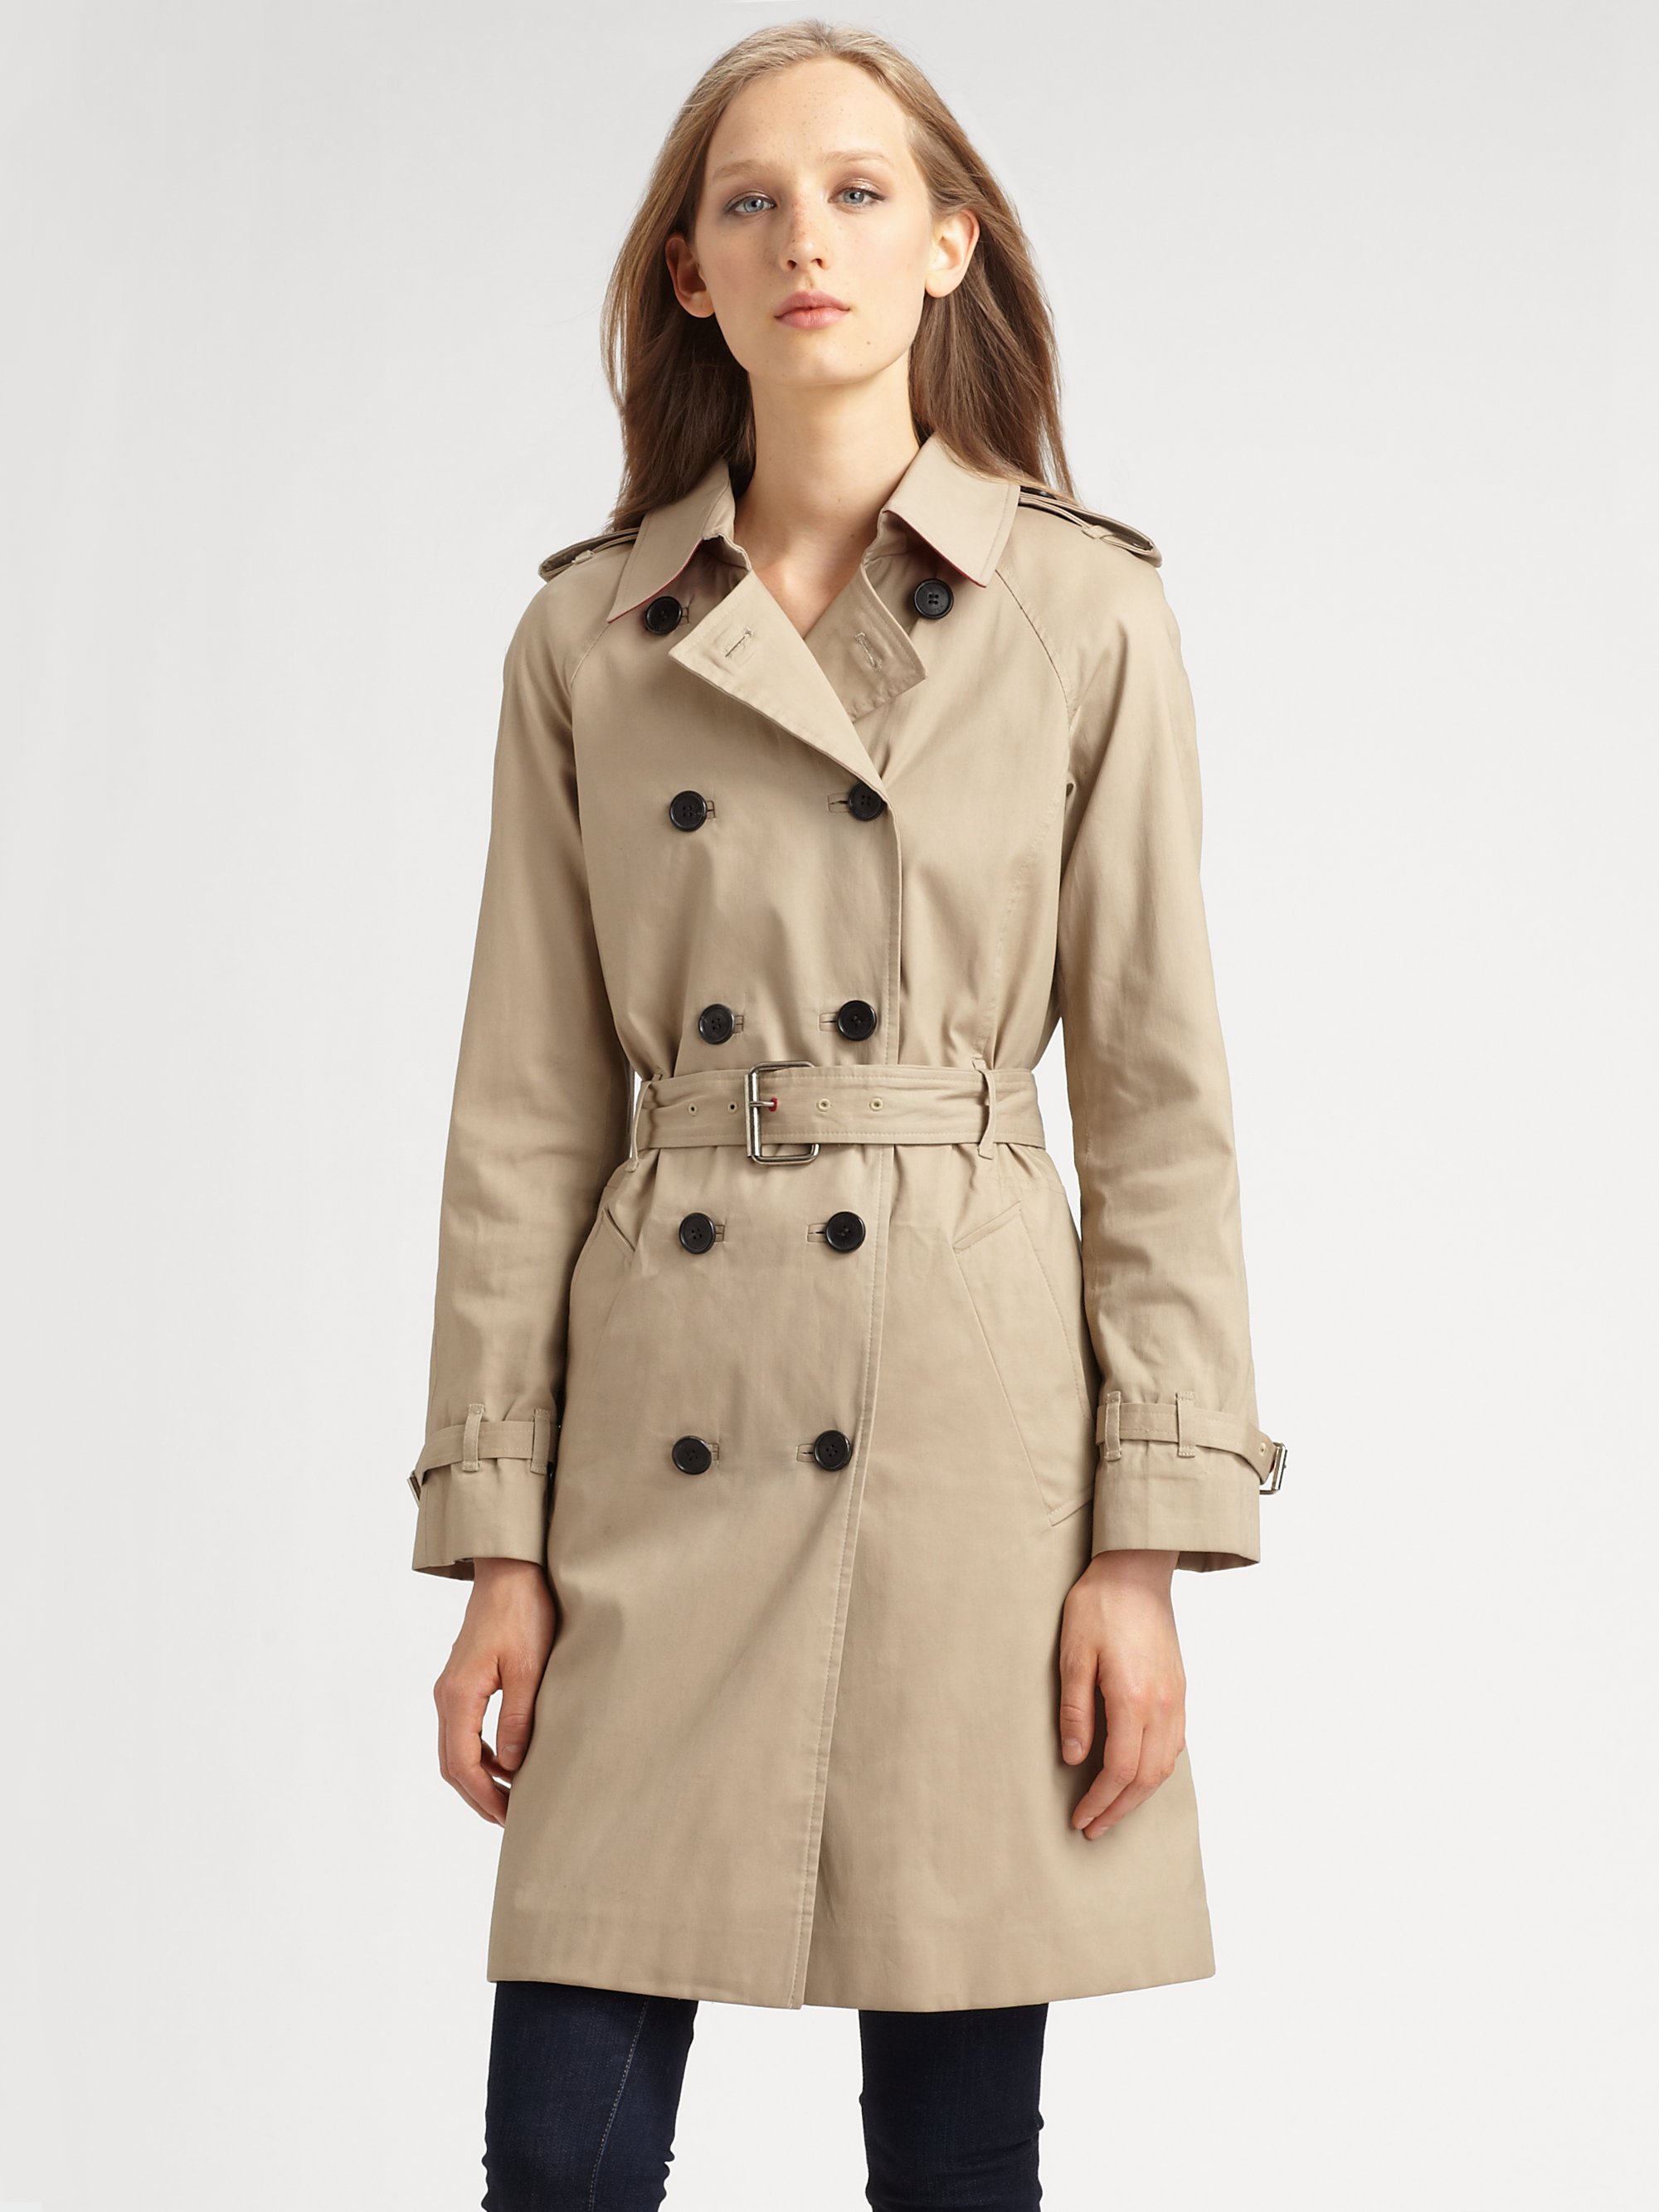 Lyst - Hunter Double Breasted Trench coat in Natural